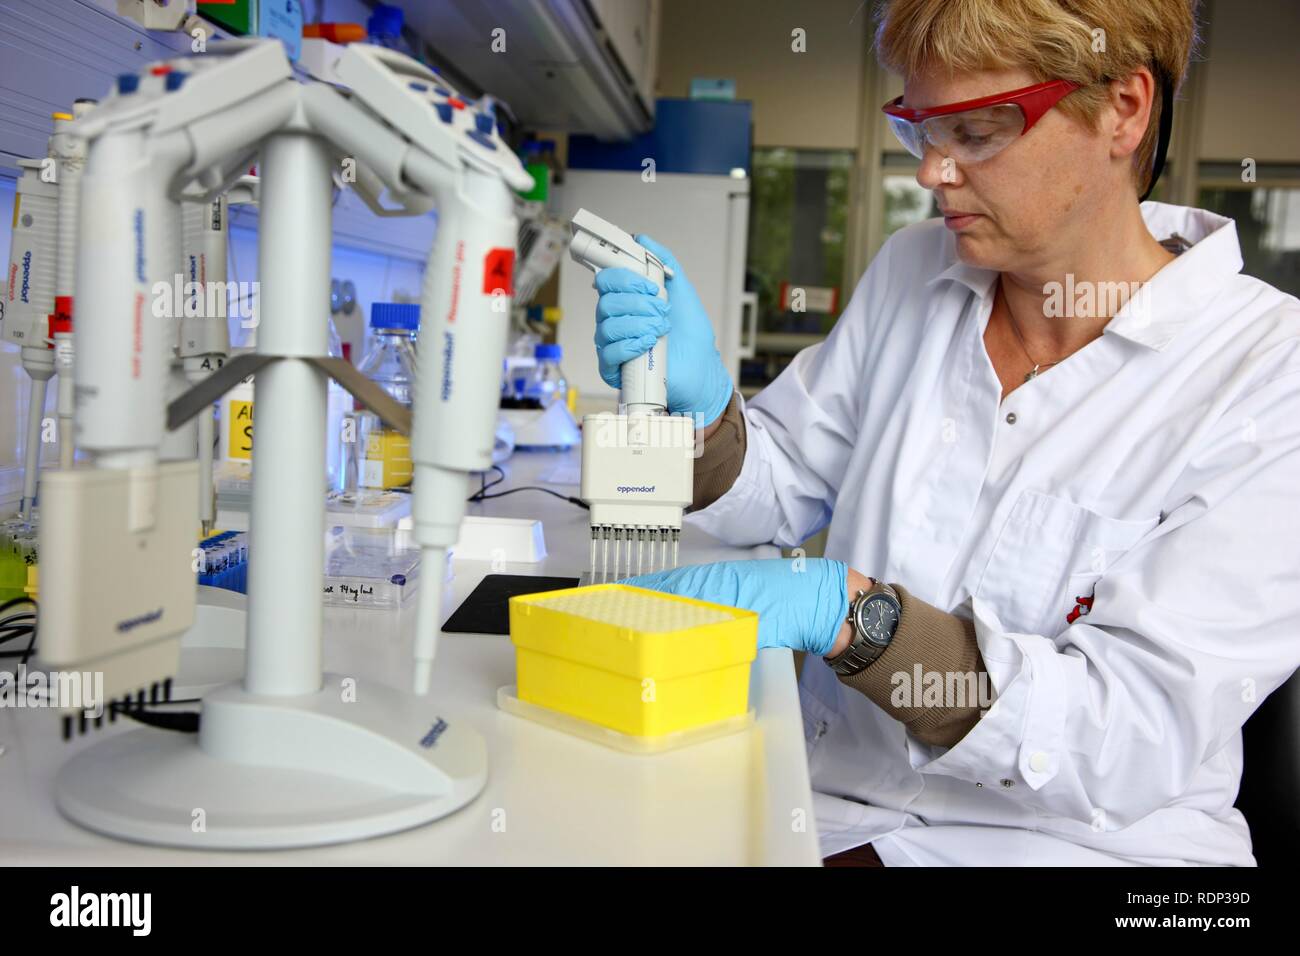 Laboratory, a scientist is transferring protein samples with a multichannel pipette onto a crystallisation plate, Centre for Stock Photo